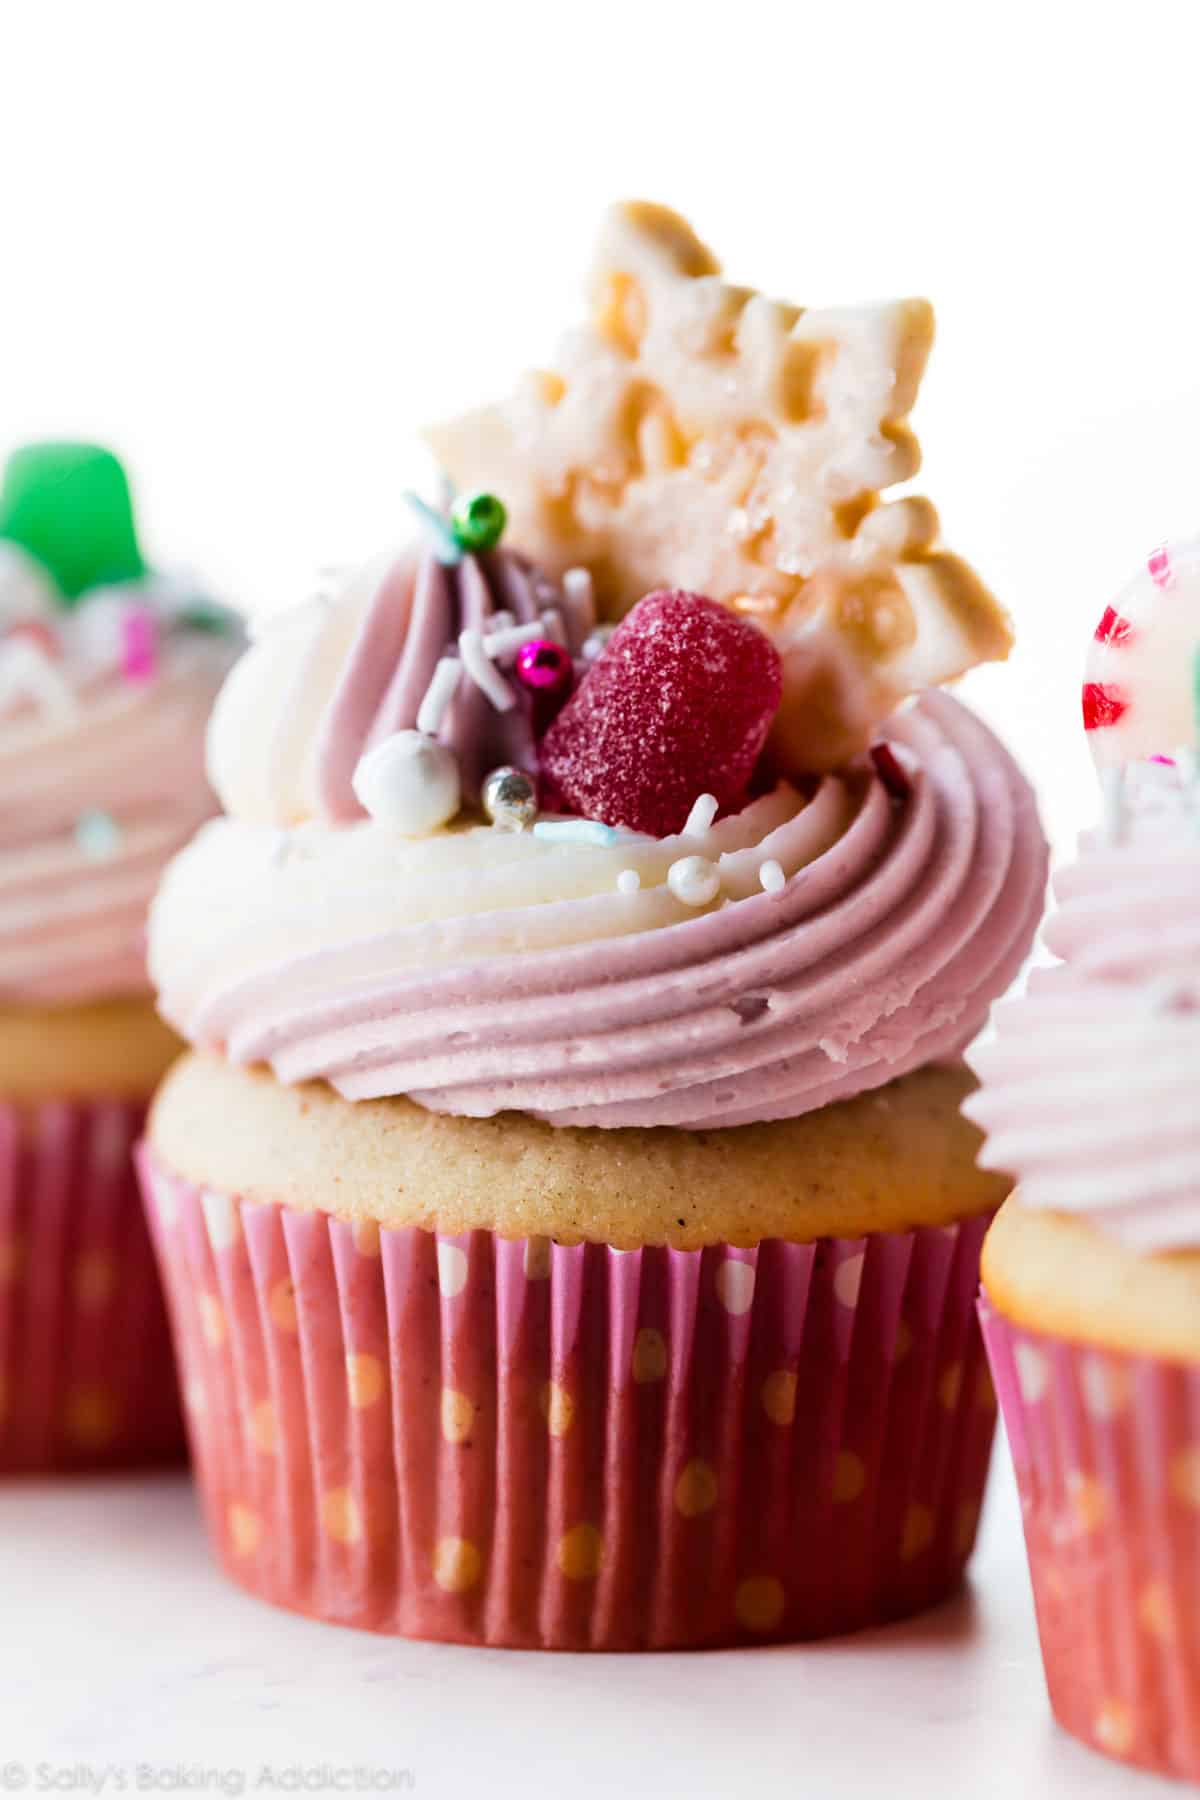 Sugar plum fairy cupcakes with candy toppings